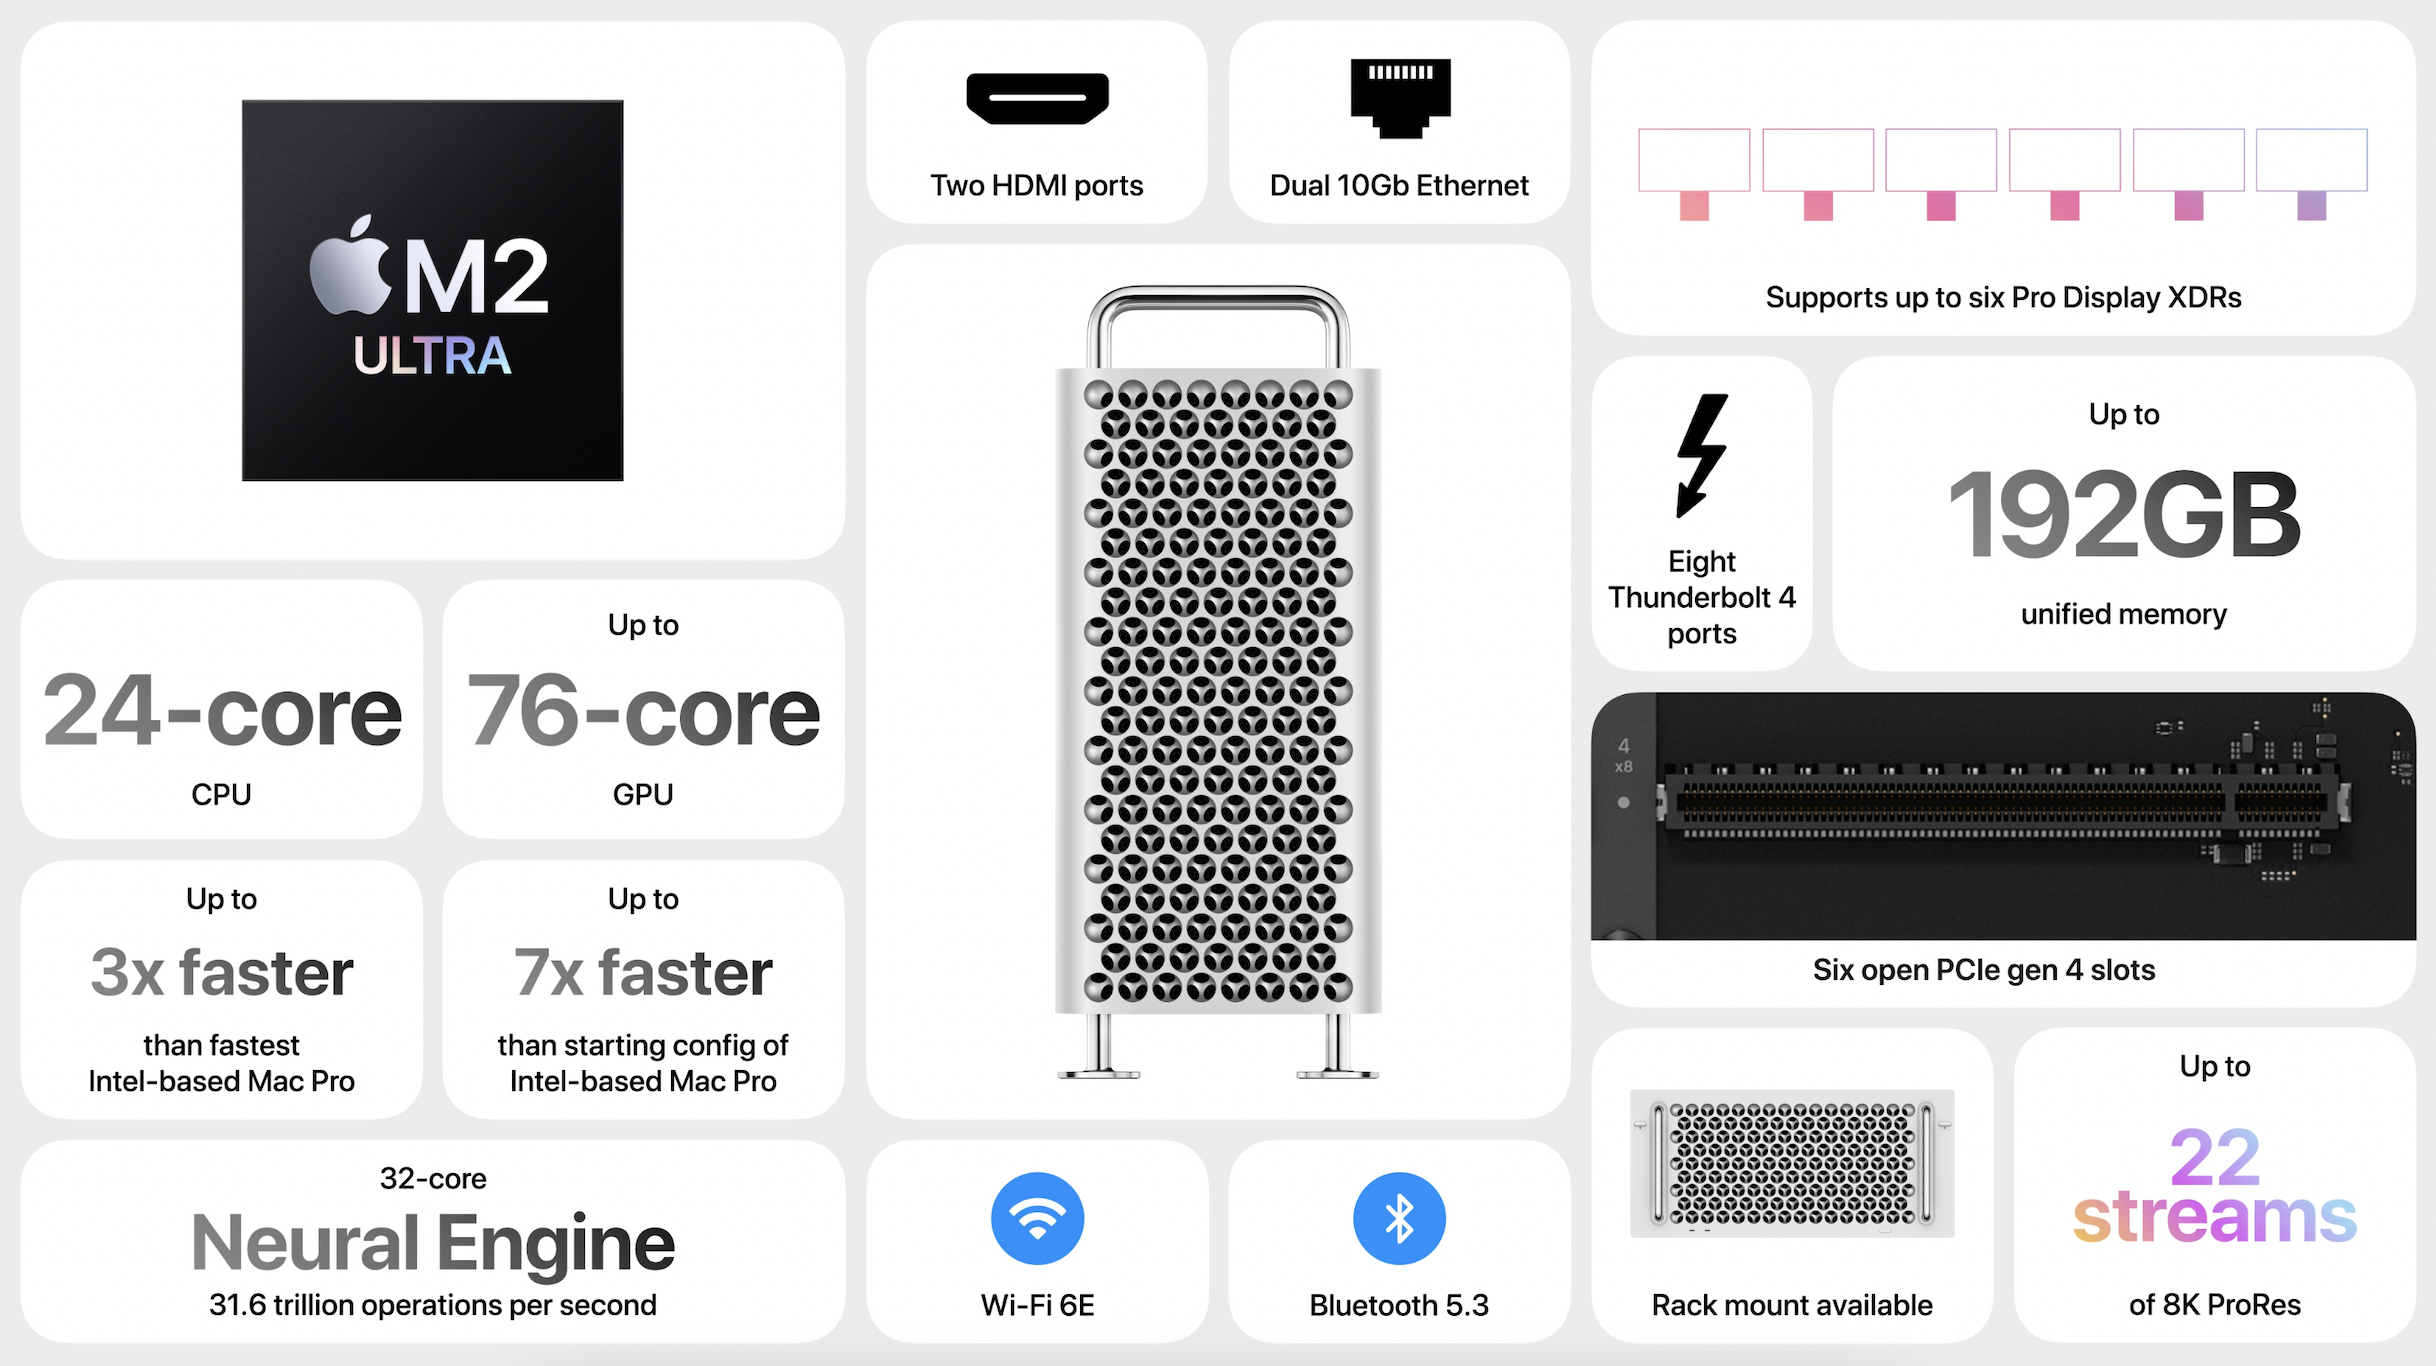 Apple refreshes the Mac Pro with its new M2 Ultra chip